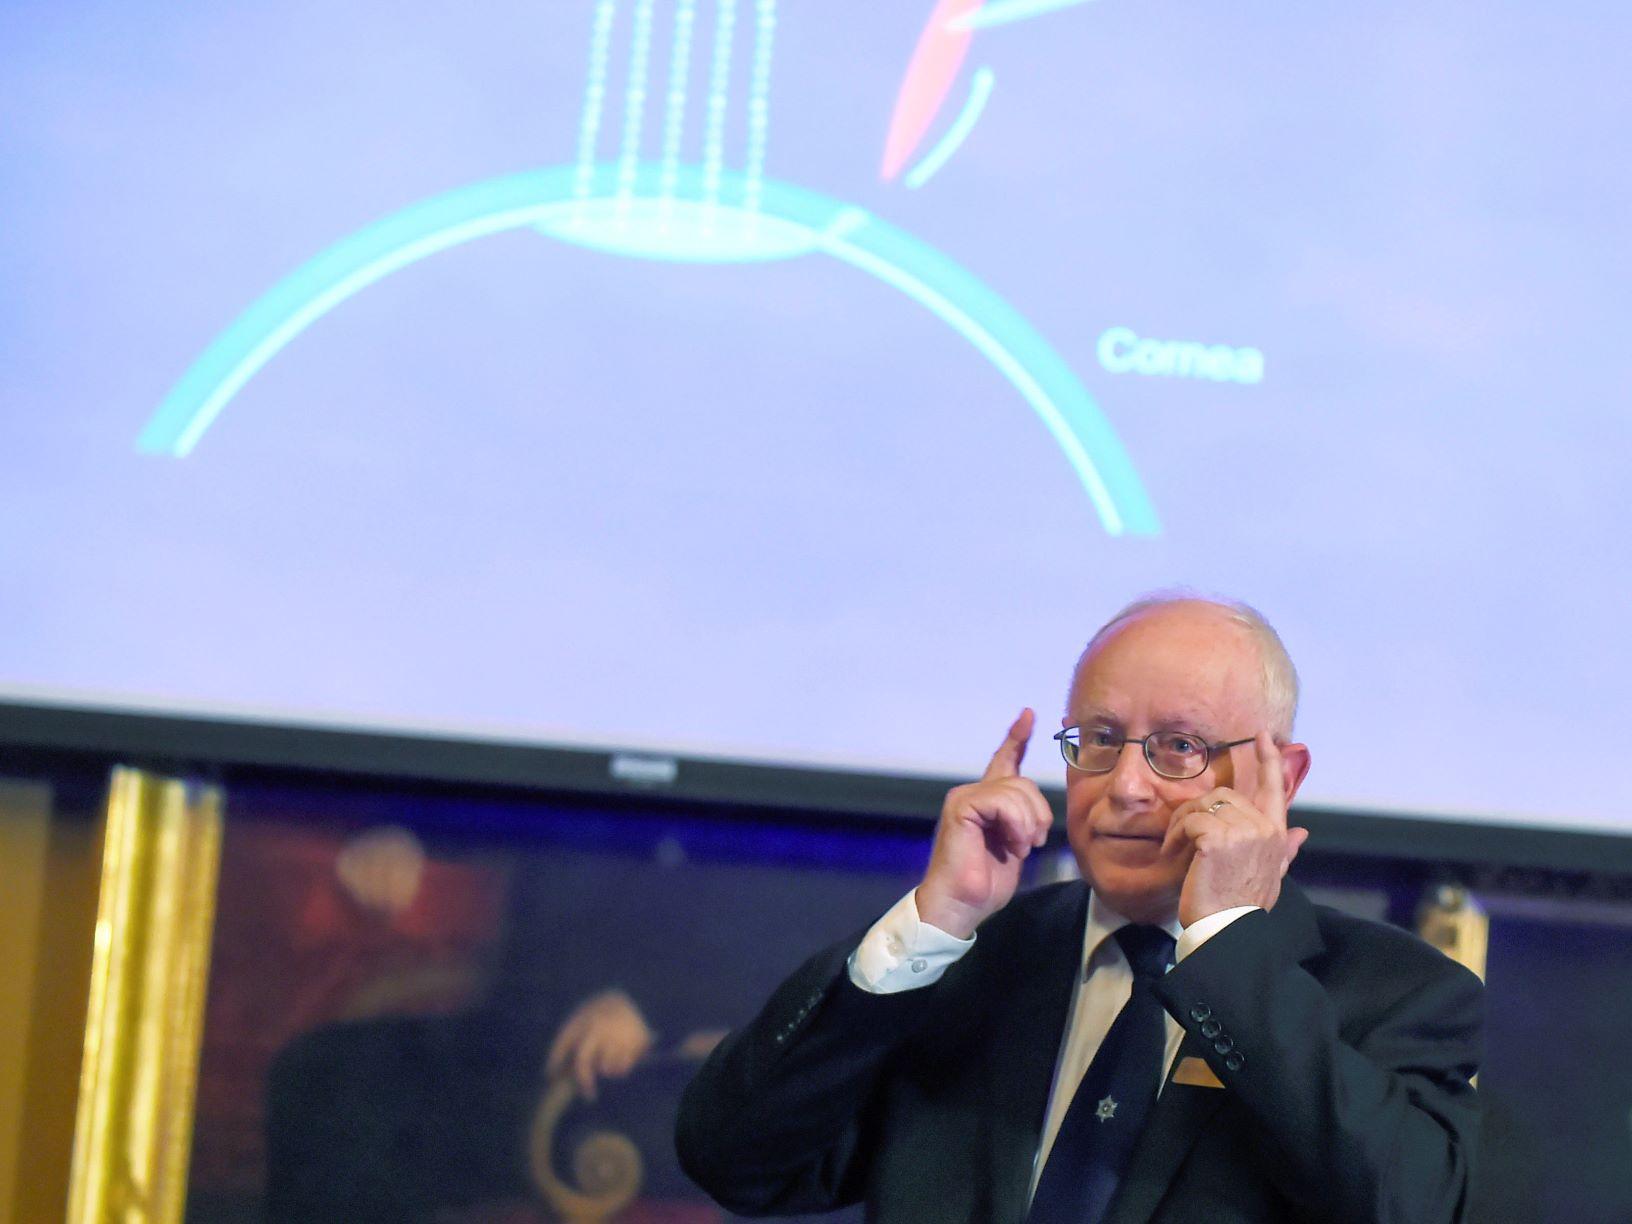 Member of the Nobel Committee for Physics Mats Larsson gives explanations on the field of research of the winners of the 2018 Nobel Prize in Physics during a press conference at the Royal Swedish Academy of Sciences on October 2, 2018 in Stockholm